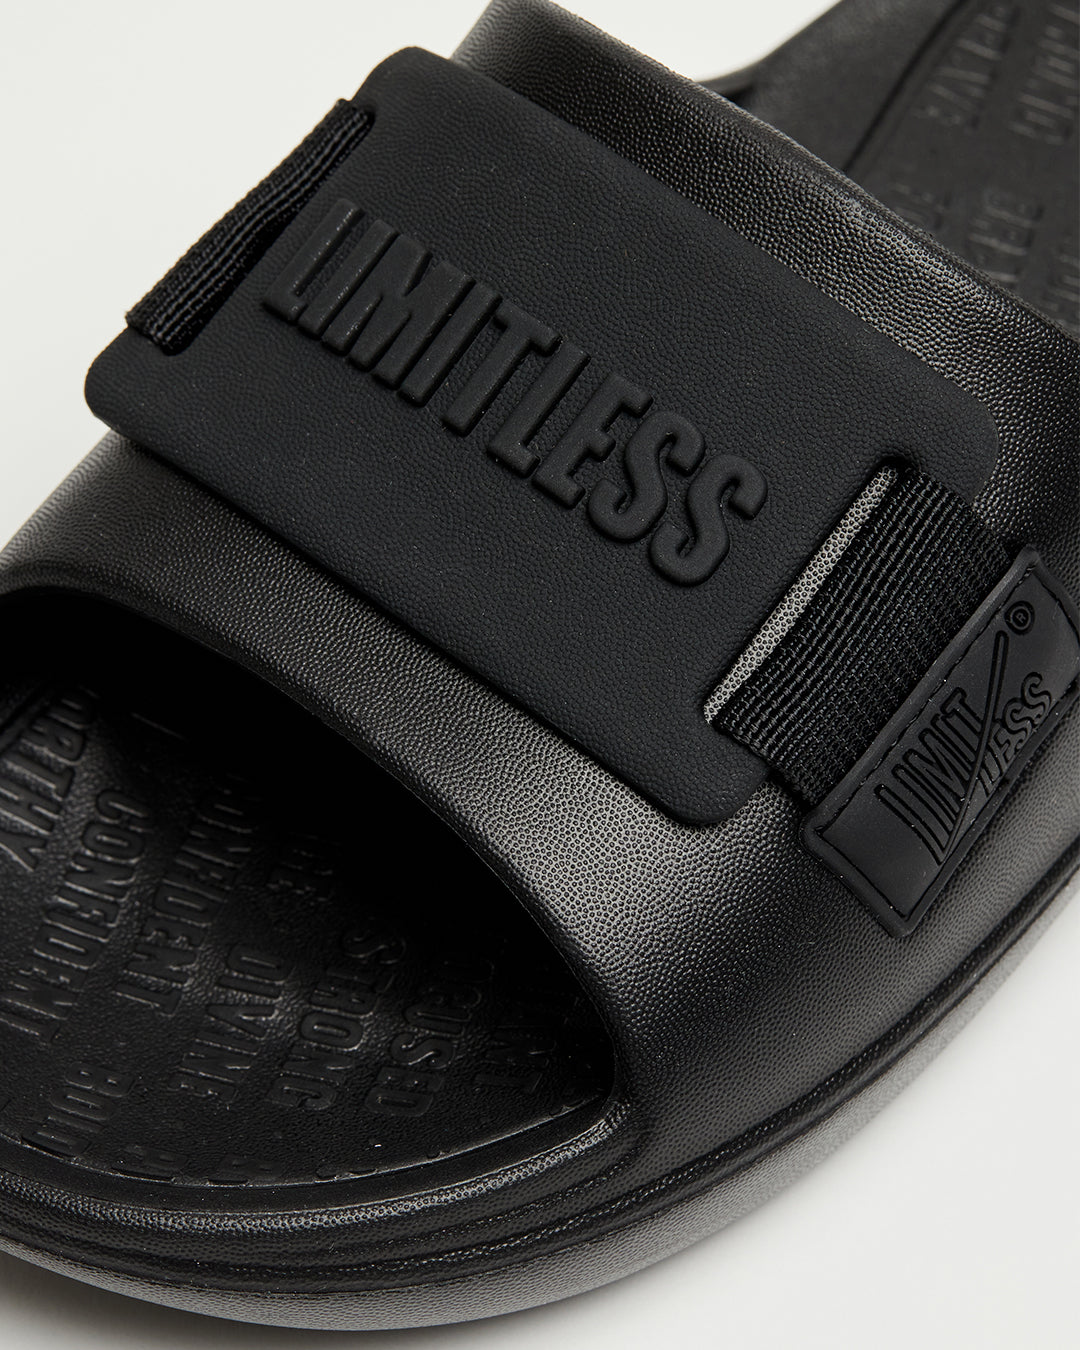 LIMITLESS SLIDES™ WITH ESSENTIAL TIBAH™ QUAD - CHIPPEWA VALLEY INDIANETTES EDITION